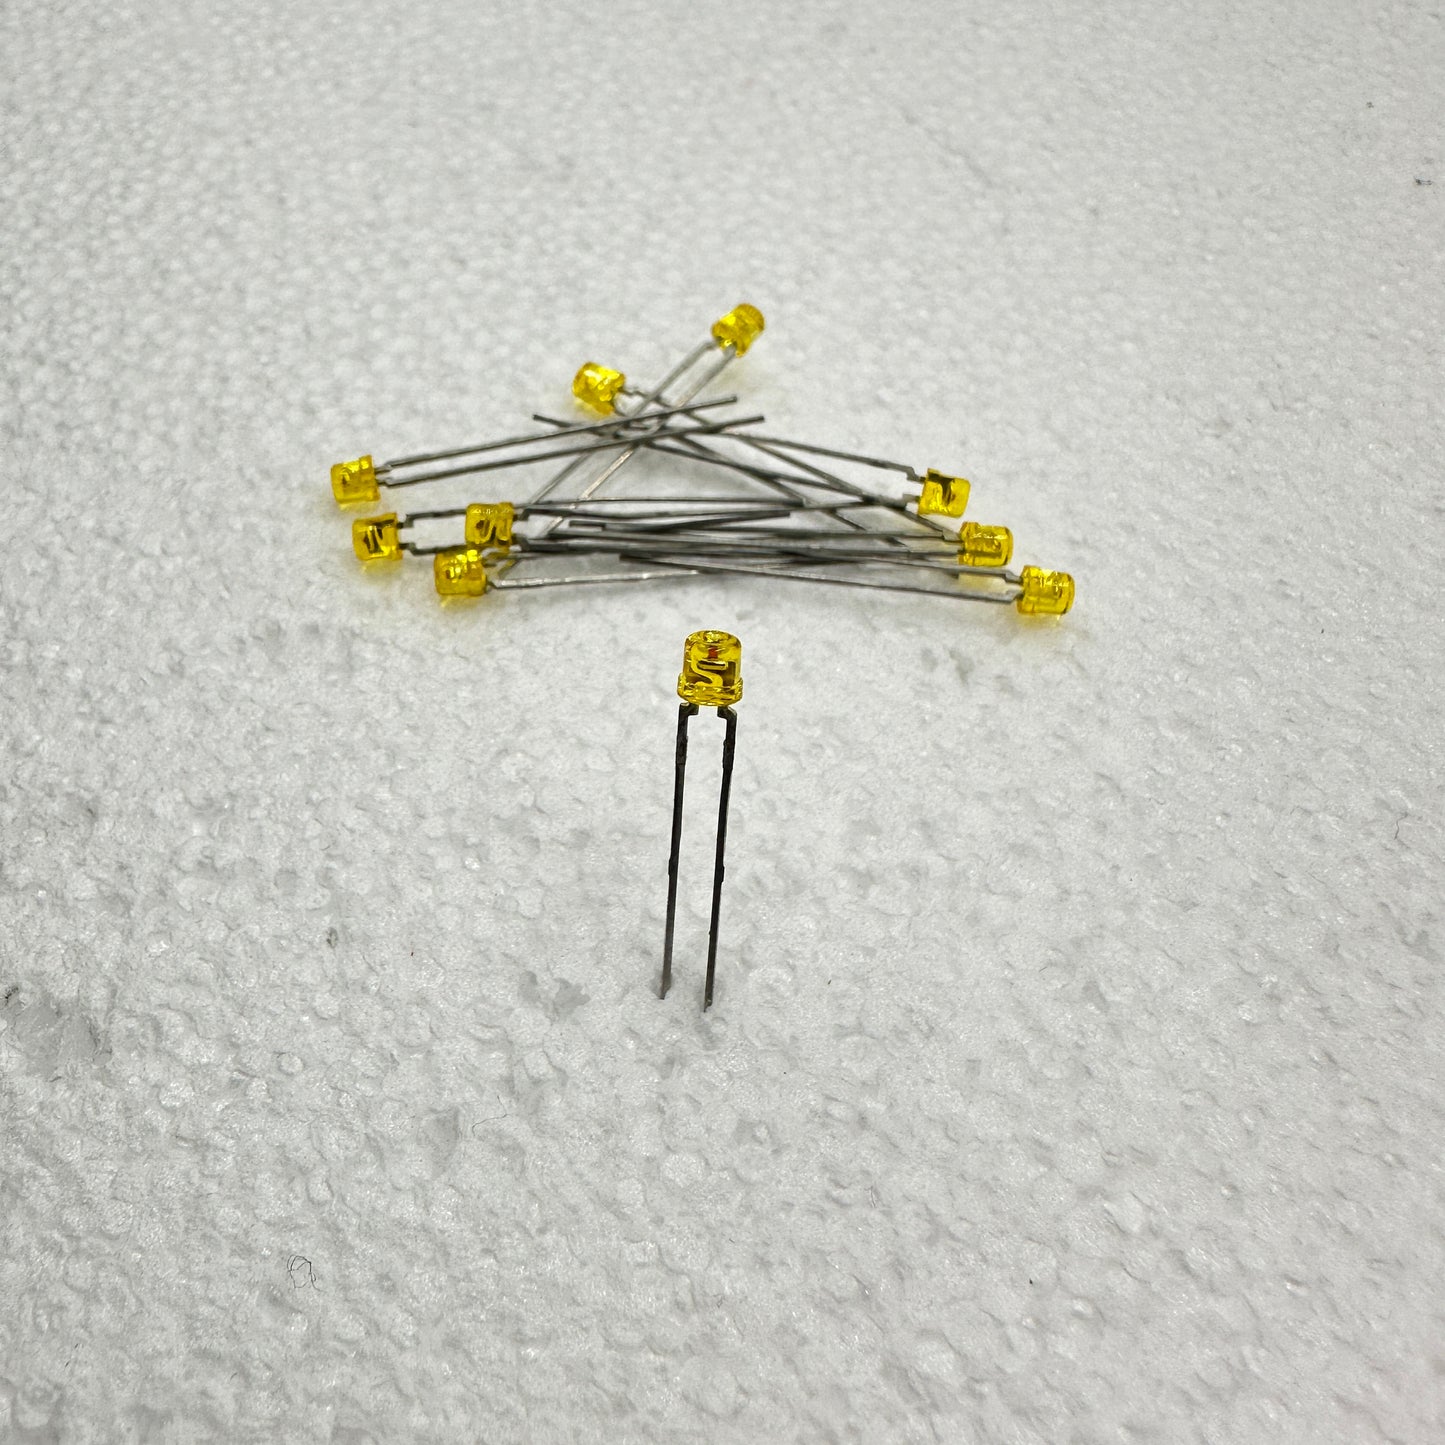 10 PACK Siemens Yellow 3mm Argus LEDs Clipping Diodes